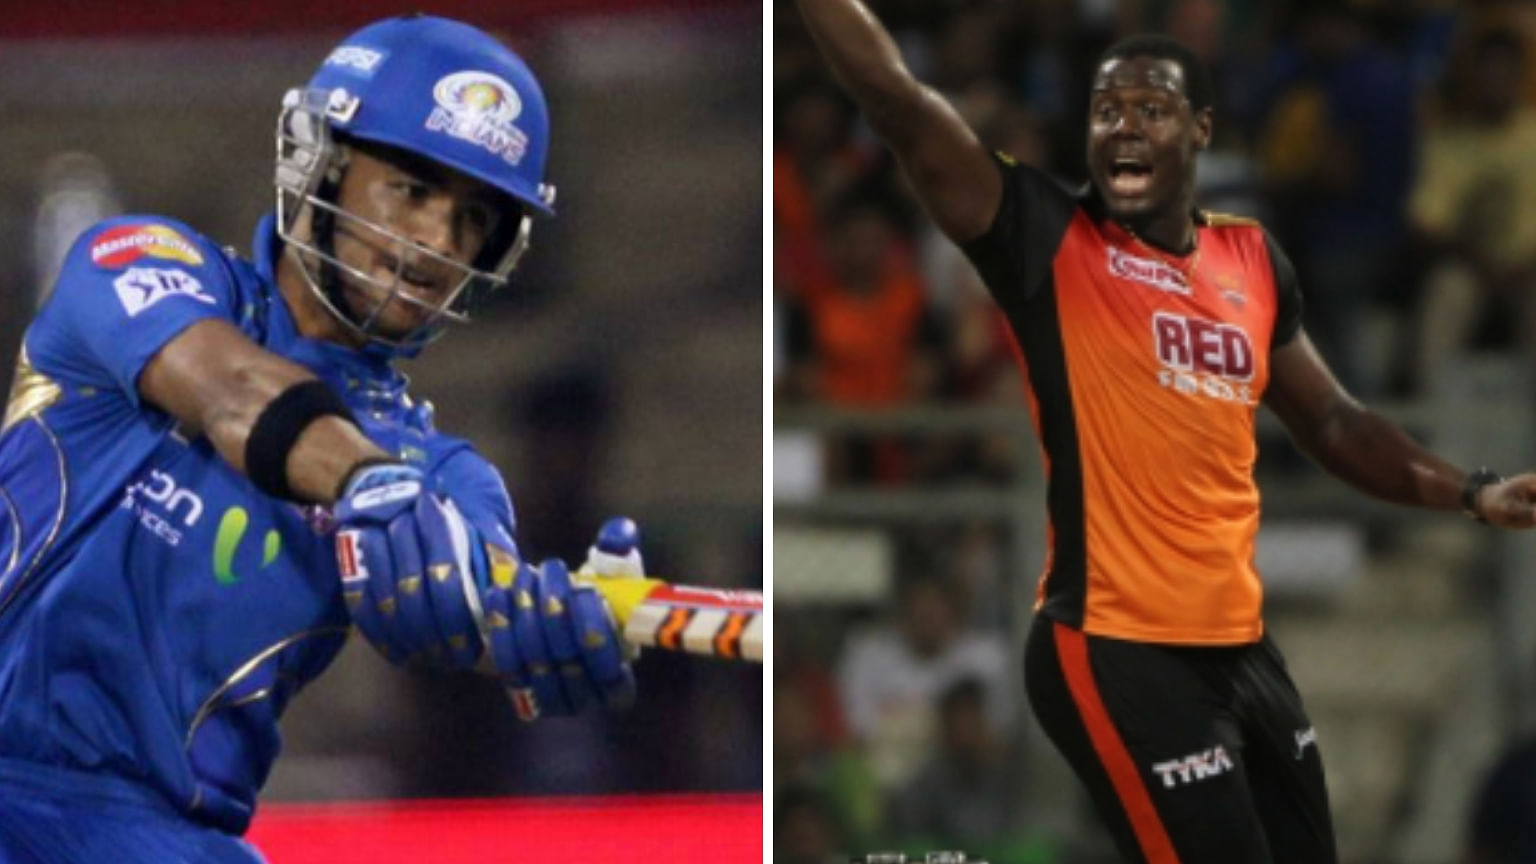 Big foreign names likely to attract a bidding war in the 2019 IPL auction.